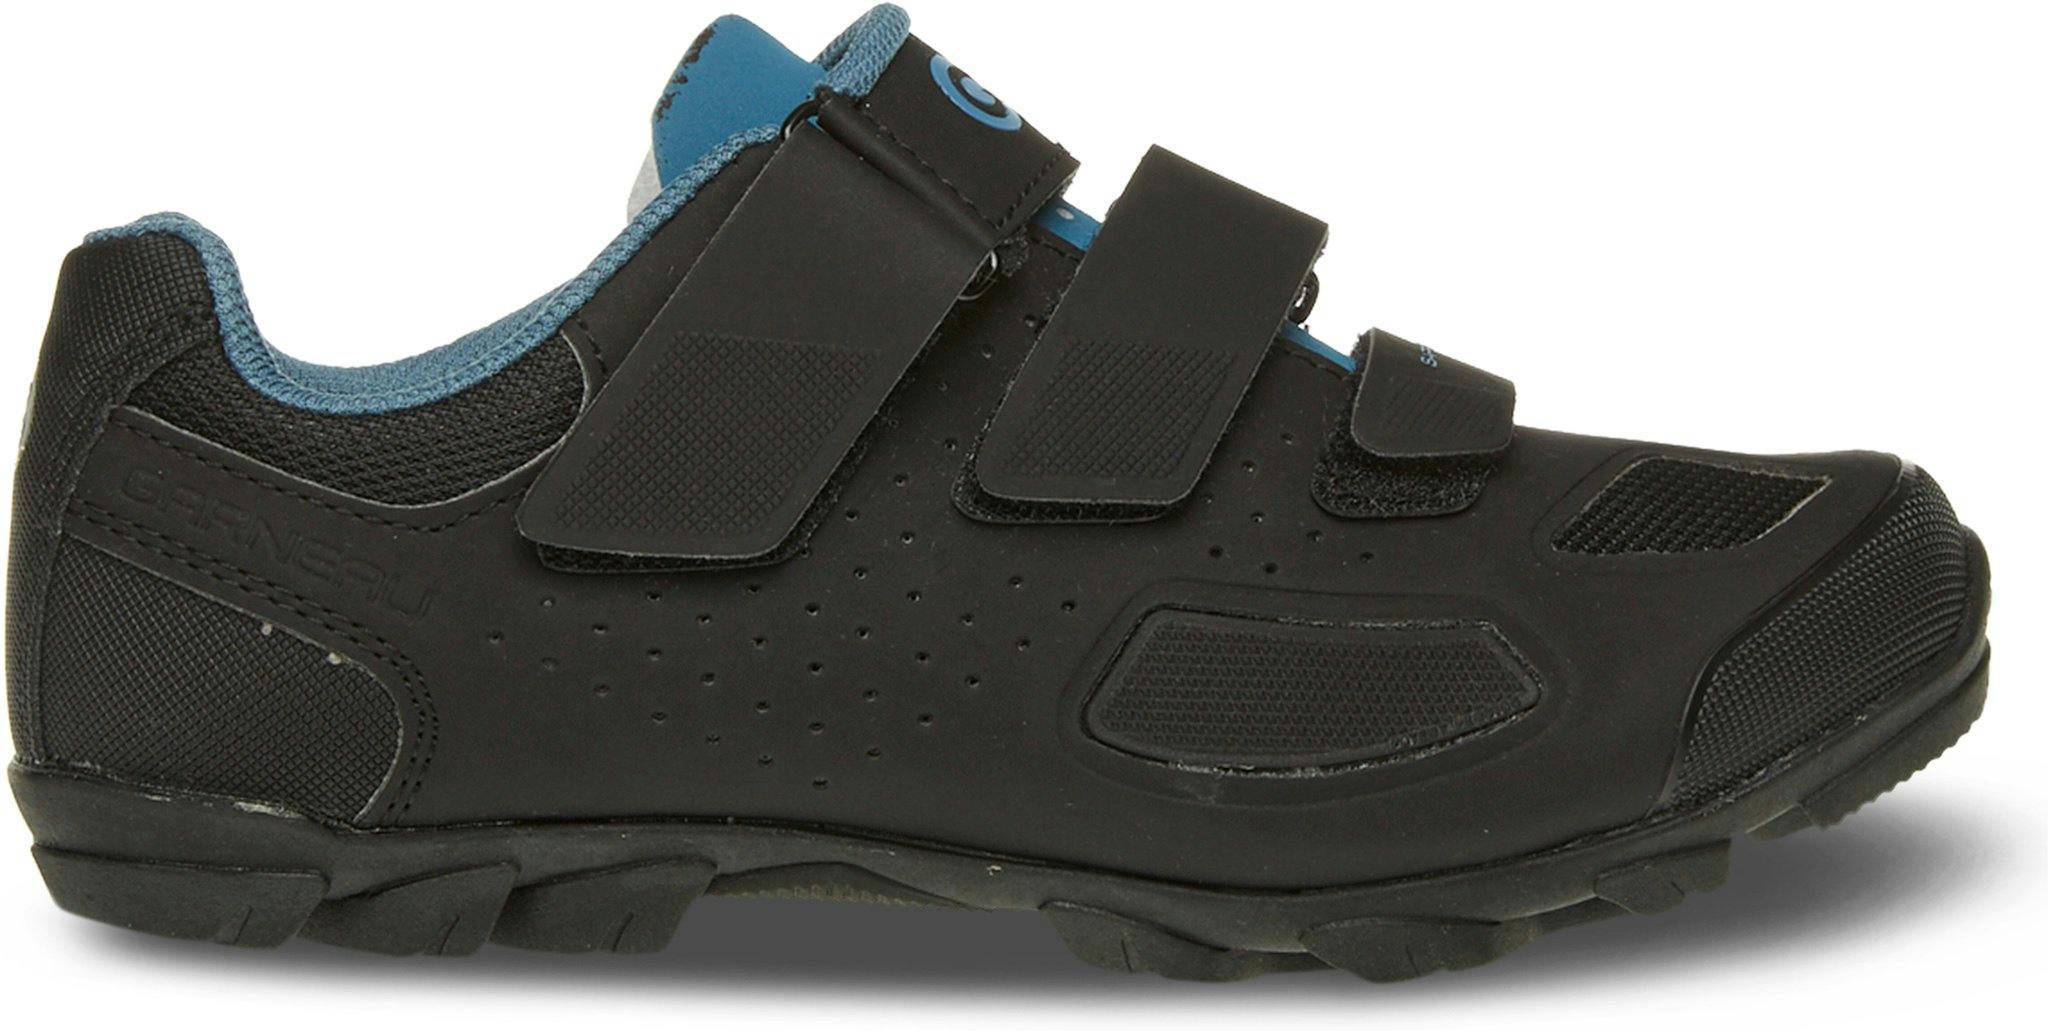 Product image for Saphire II Cycling Shoes - Women's